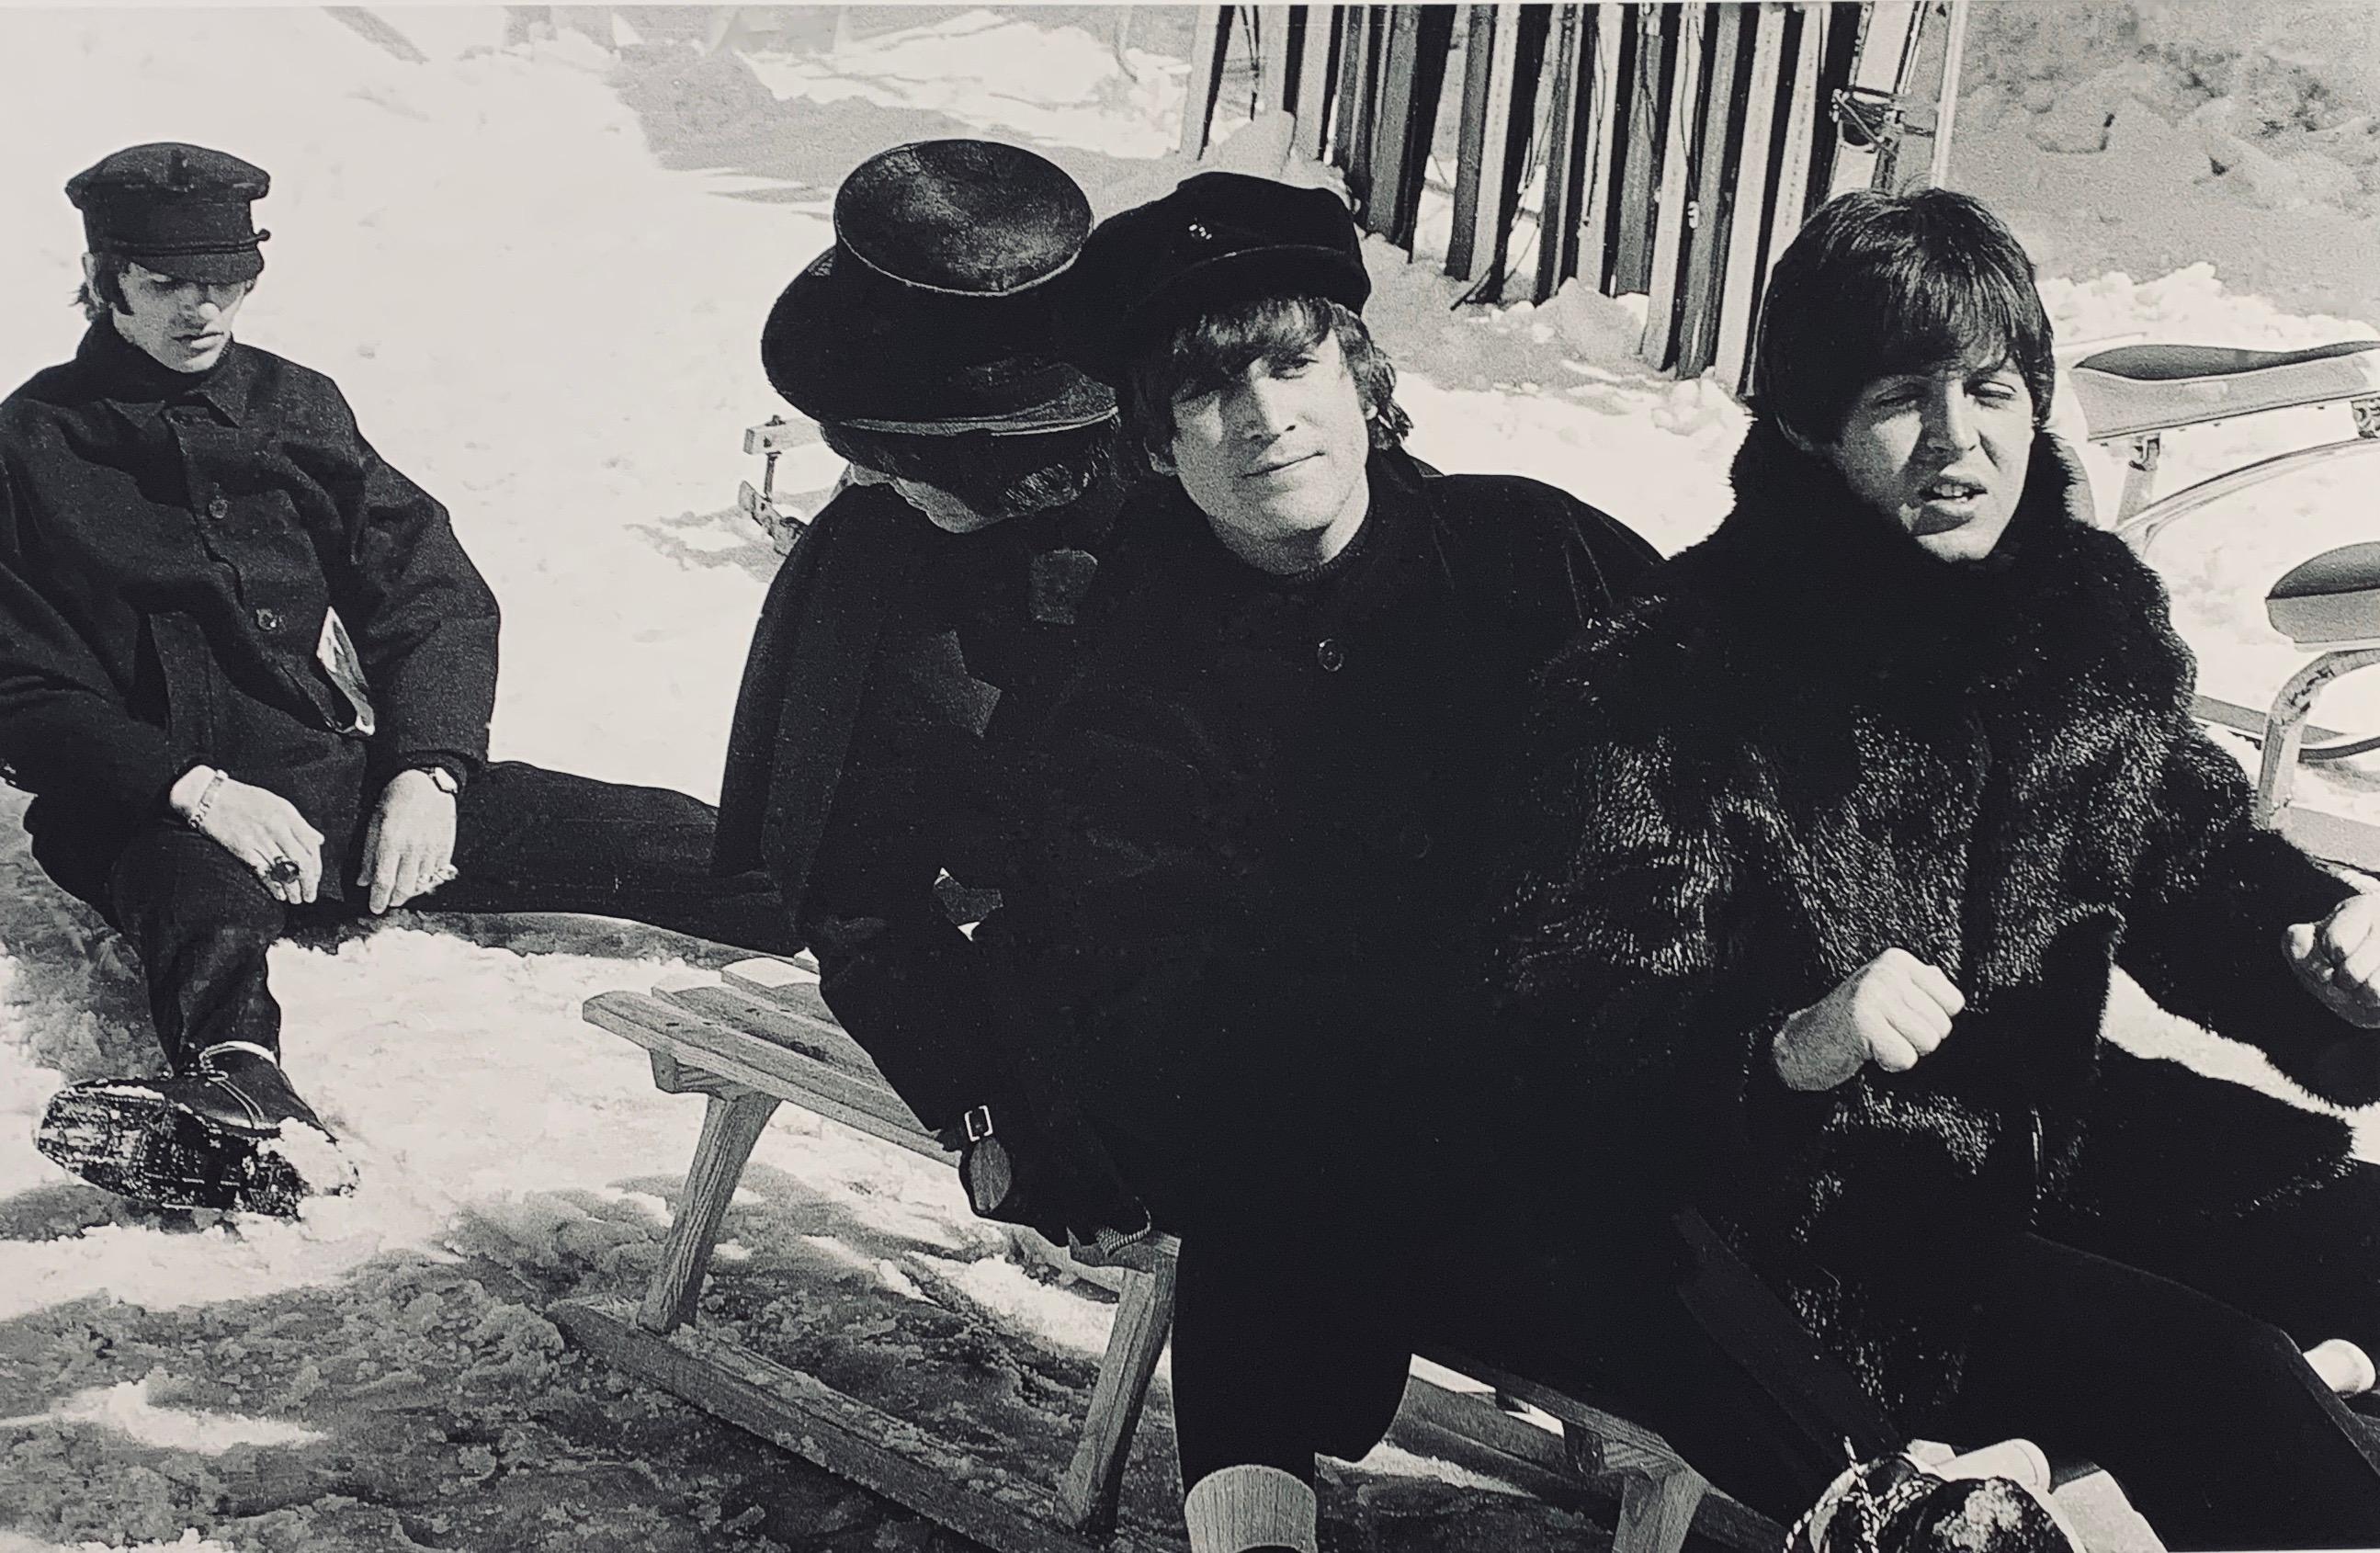 Very rare original photograph by German celebrity photographer Roger Fritz.  The image featuring all 4 of the Beatles sledding in the snow is from Fritz's collection that has been unseen by the public until now.  His captivating images of the